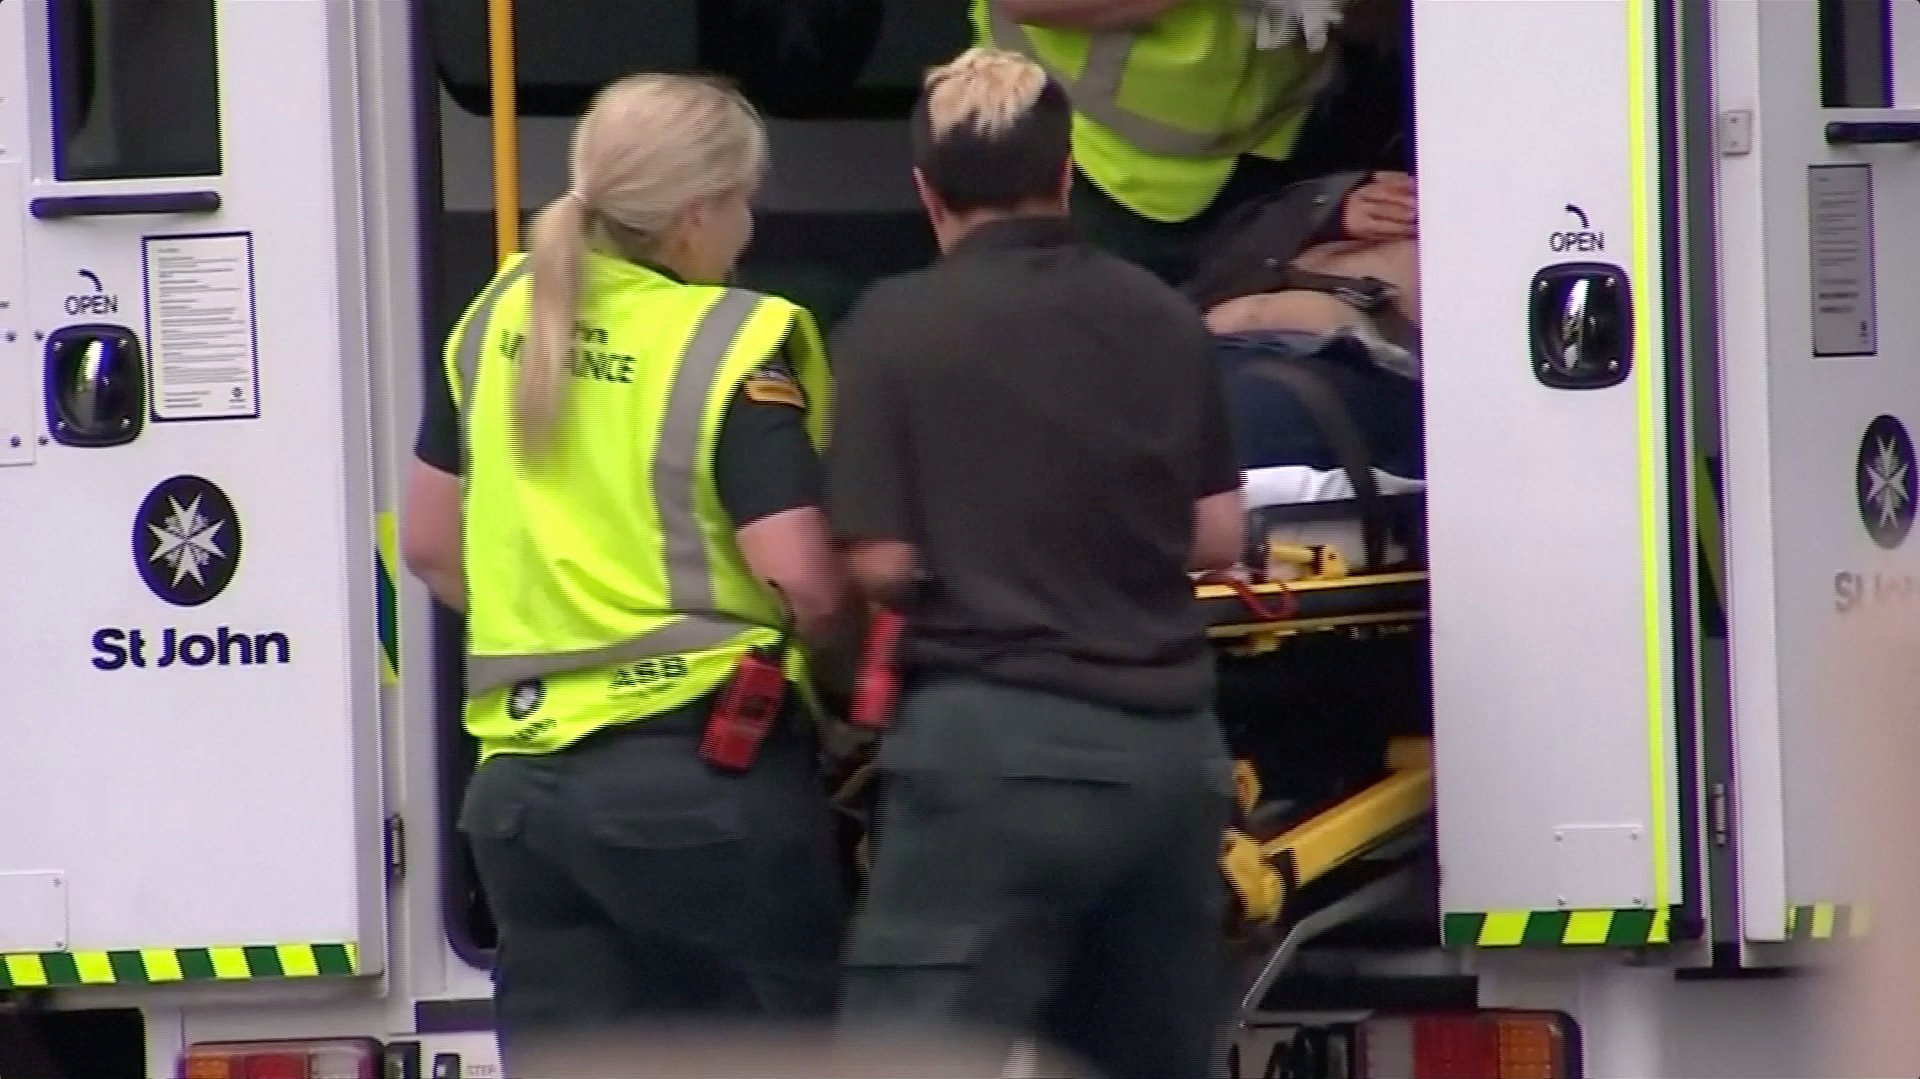 Emergency services personnel transport a stretcher carrying a person at a hospital, after reports that several shots had been fired, in central Christchurch, New Zealand March 15, 2019, in this still image taken from video. TVNZ/via REUTERS TV